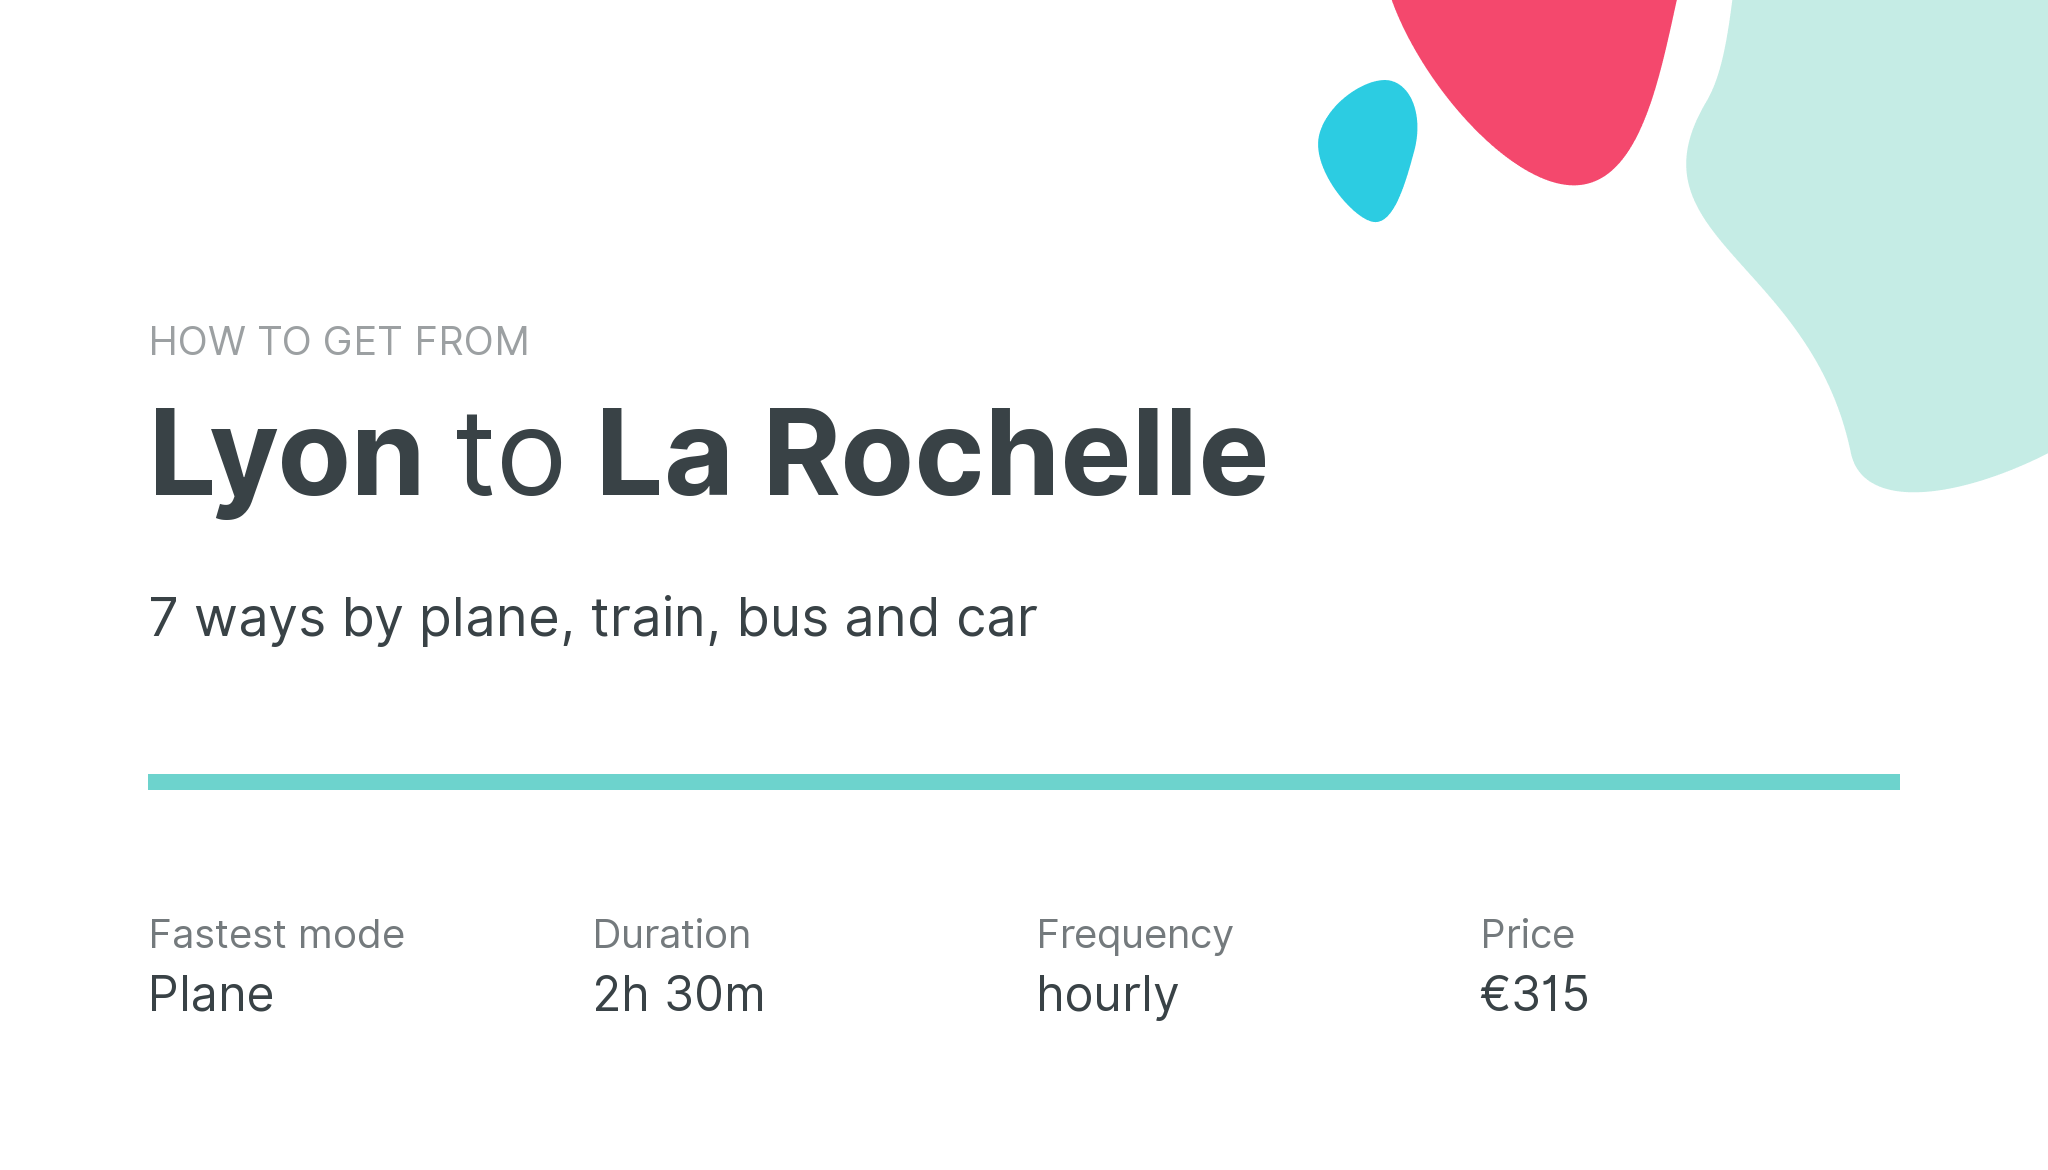 How do I get from Lyon to La Rochelle